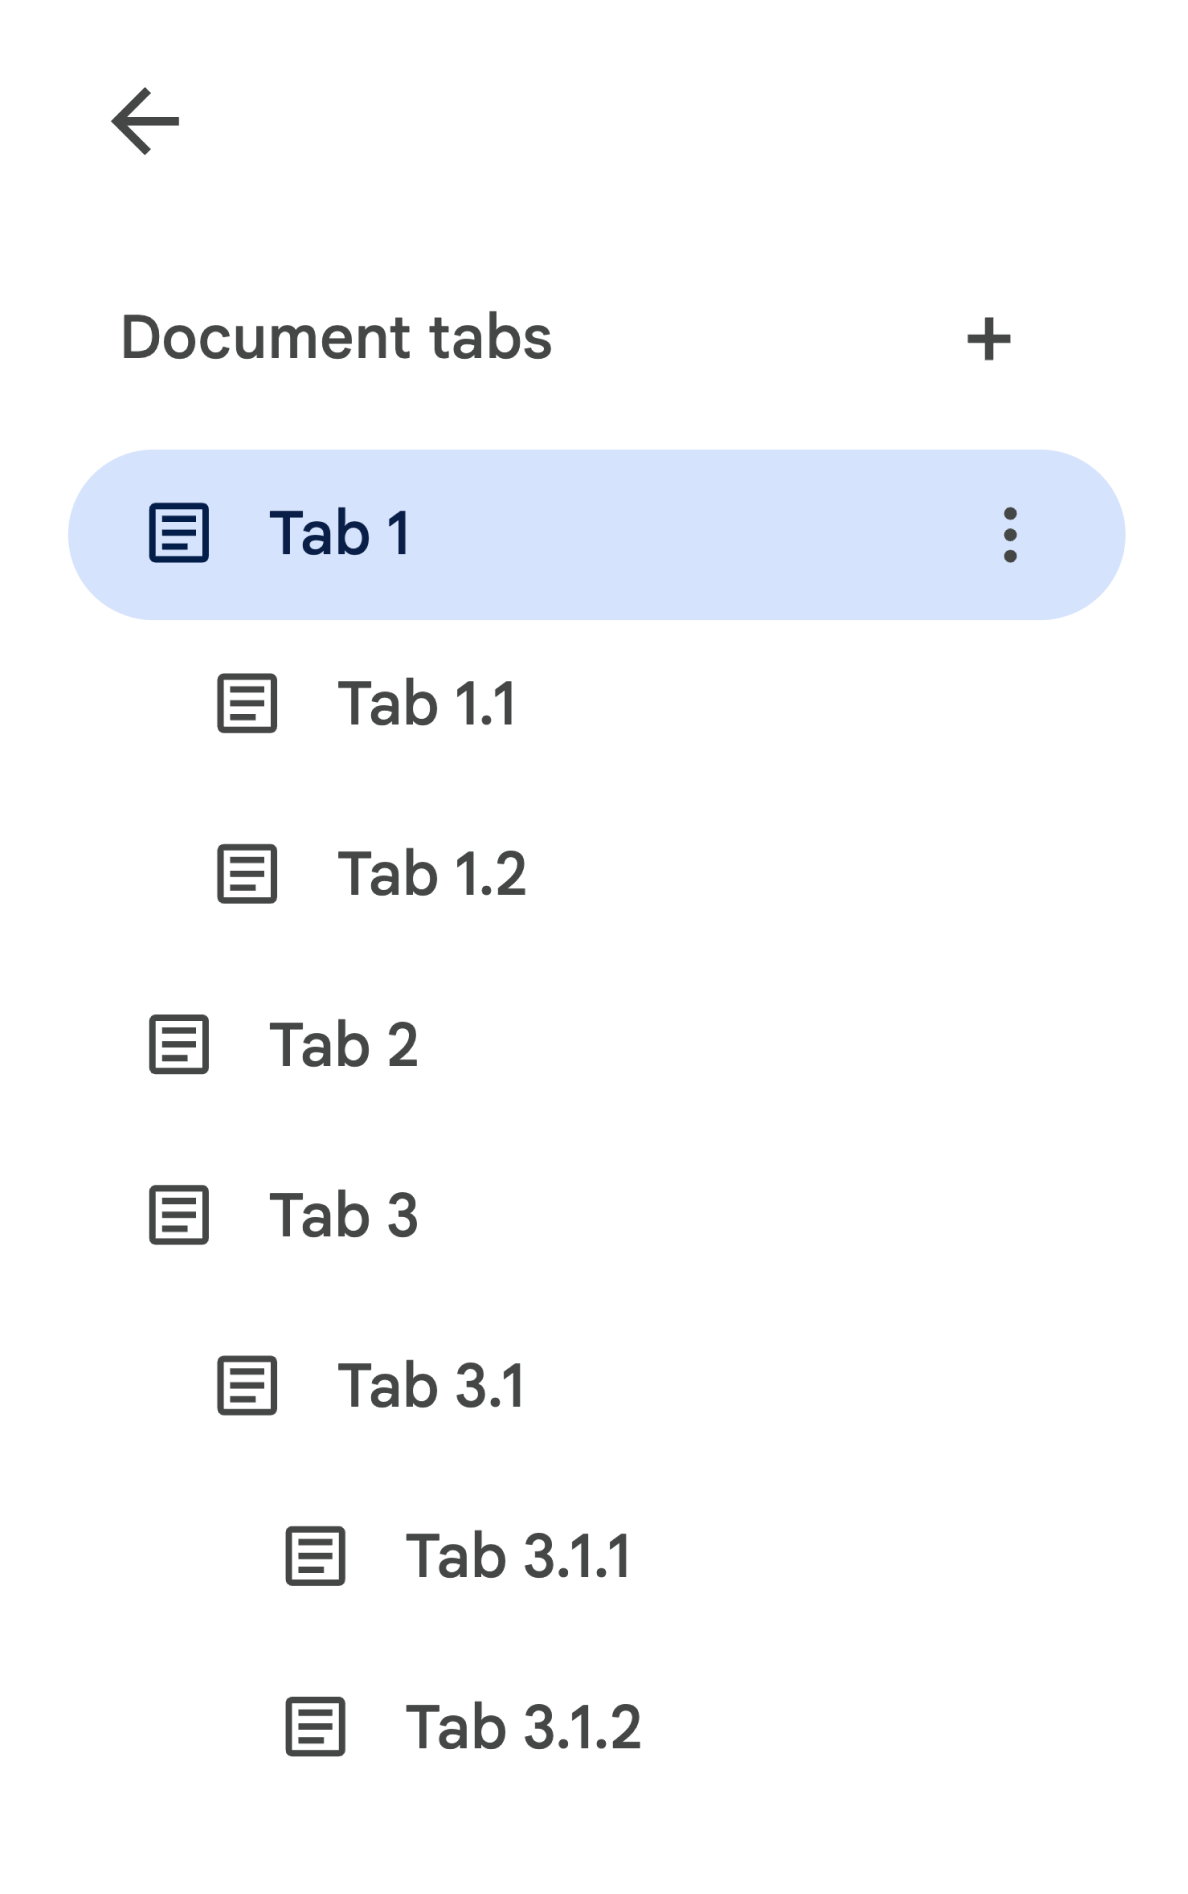 Tablist UI containing three top-level tabs, some of which have child tabs